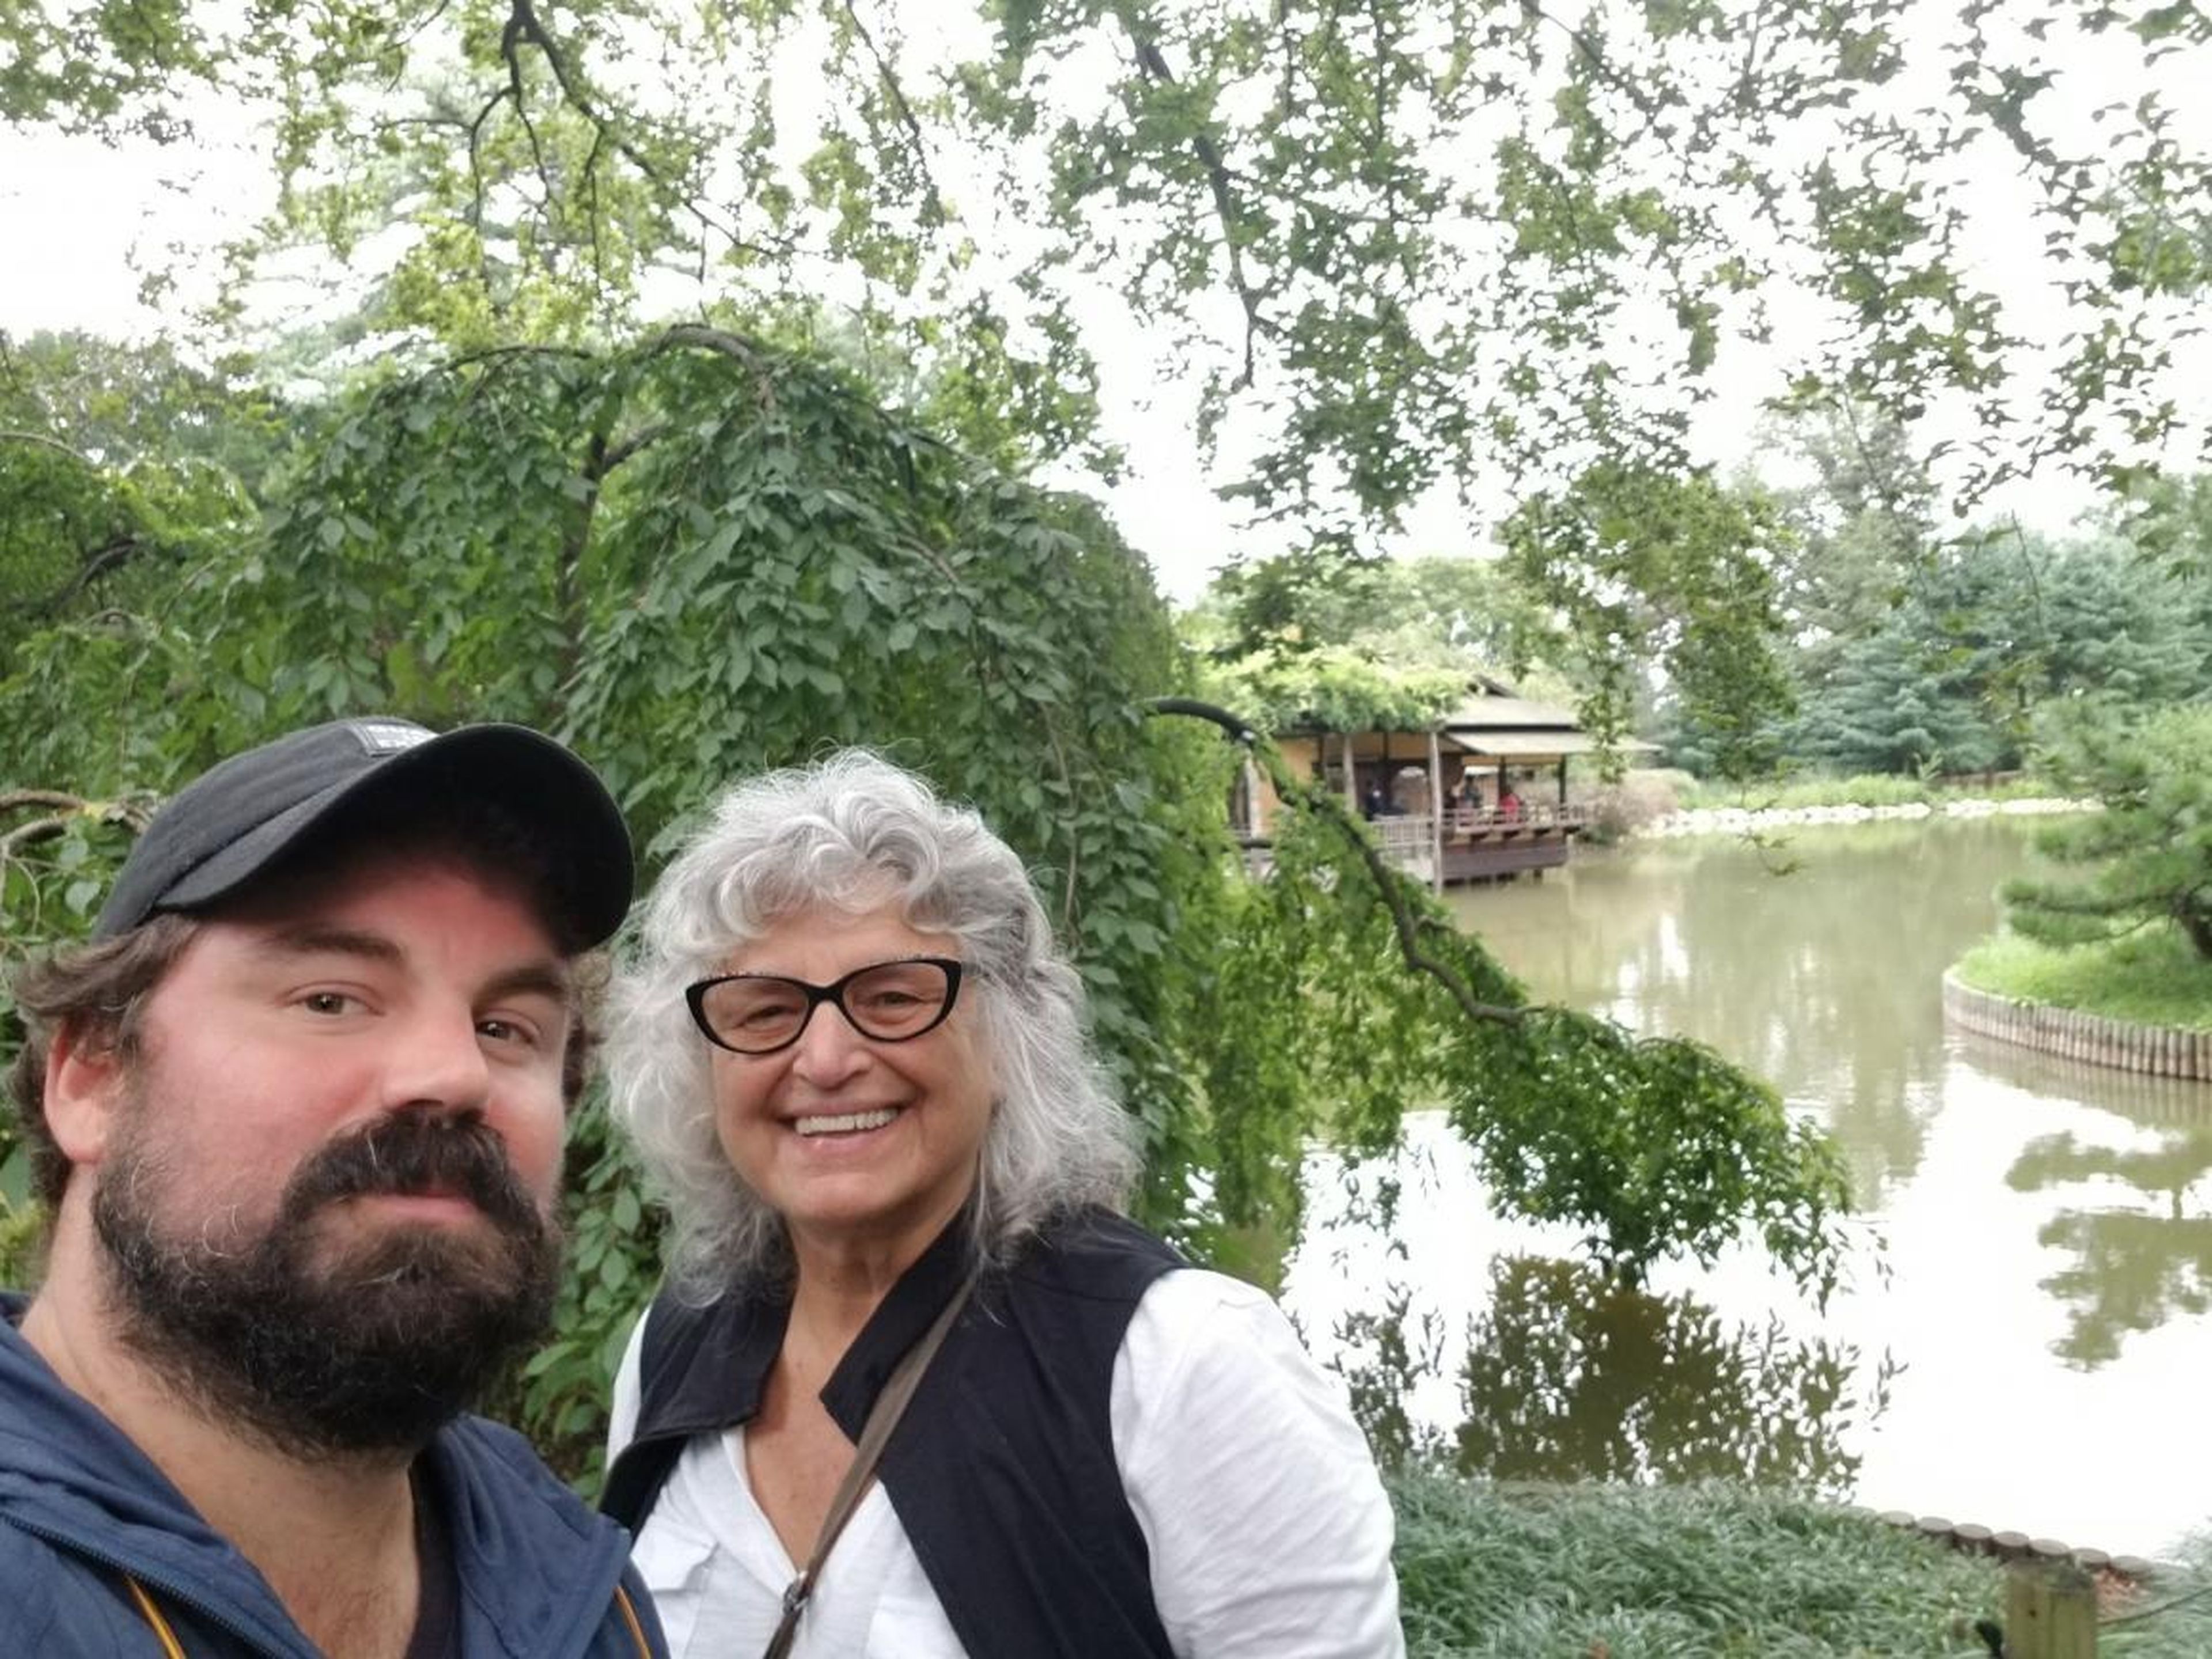 At noon, Sabatier and Robin take advantage of the nice weather and head to Brooklyn Botanical Garden, where Sabatier is a member. "This is one of my favorite places on earth," he said.